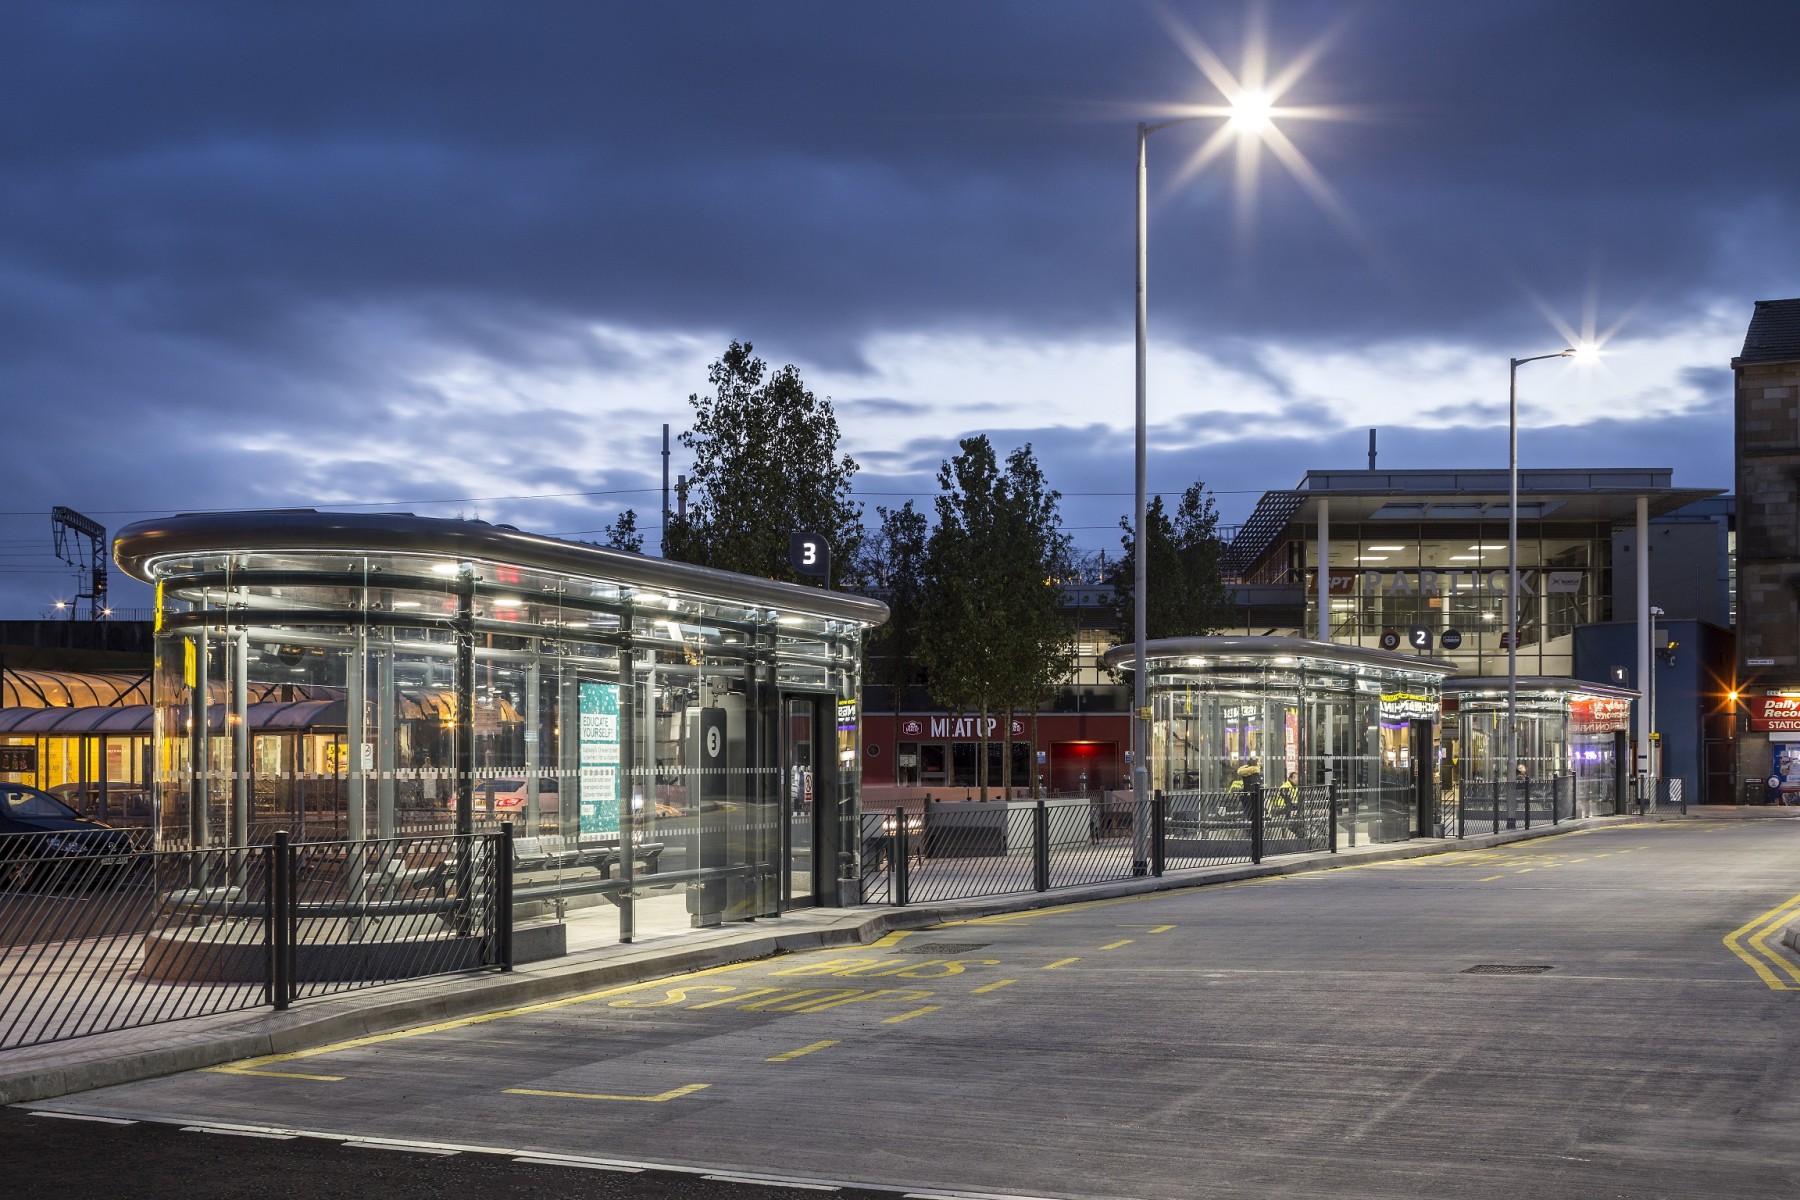 The Gallery | New West Croydon bus station | New Civil Engineer